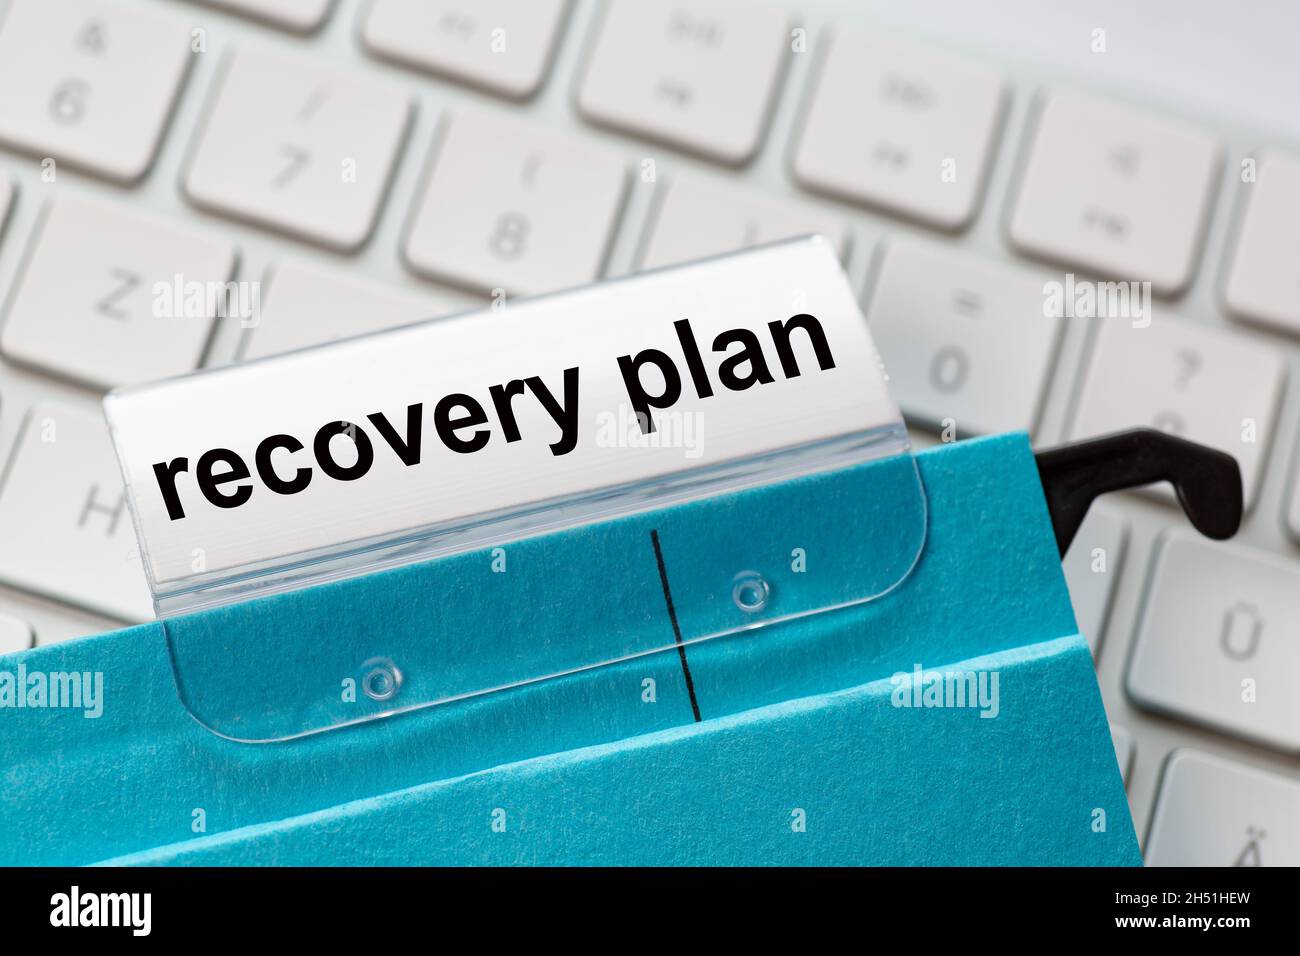 recovery plan is on a label of a blue hanging file. In the background a computer keyboard Stock Photo